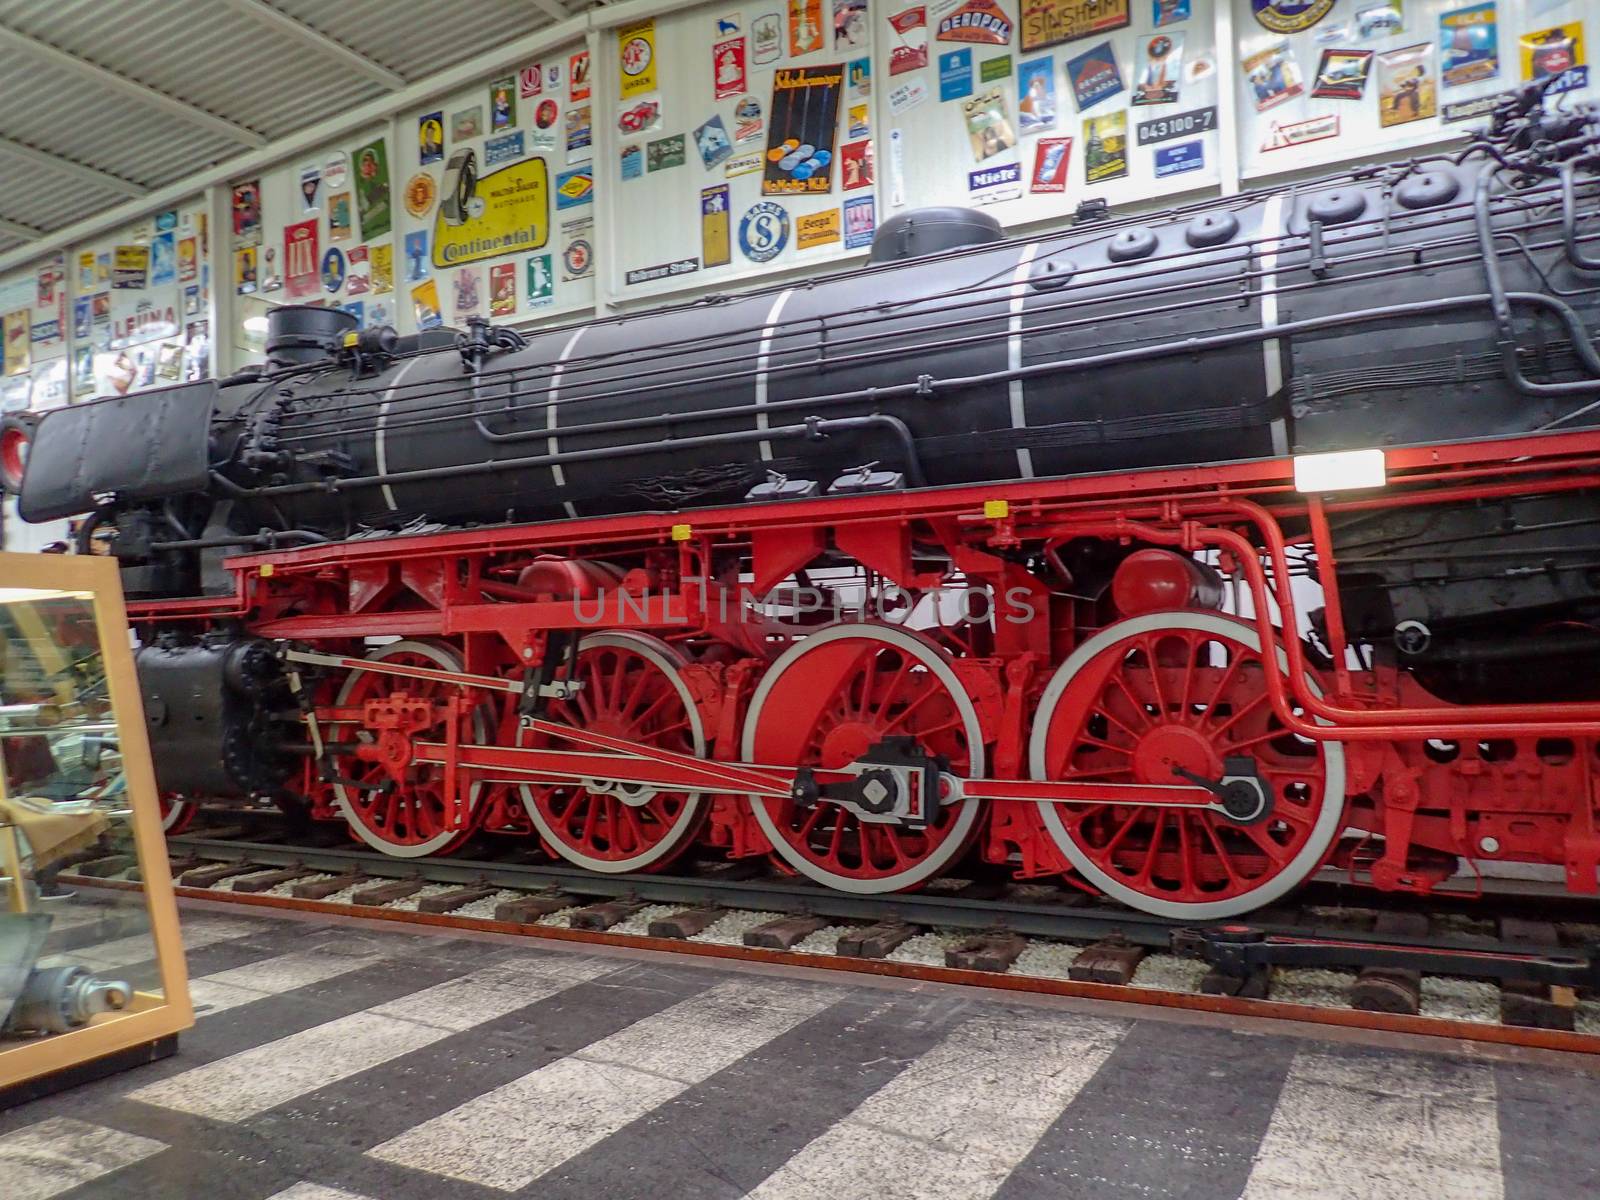 an old steam train in a museum by Tevion25